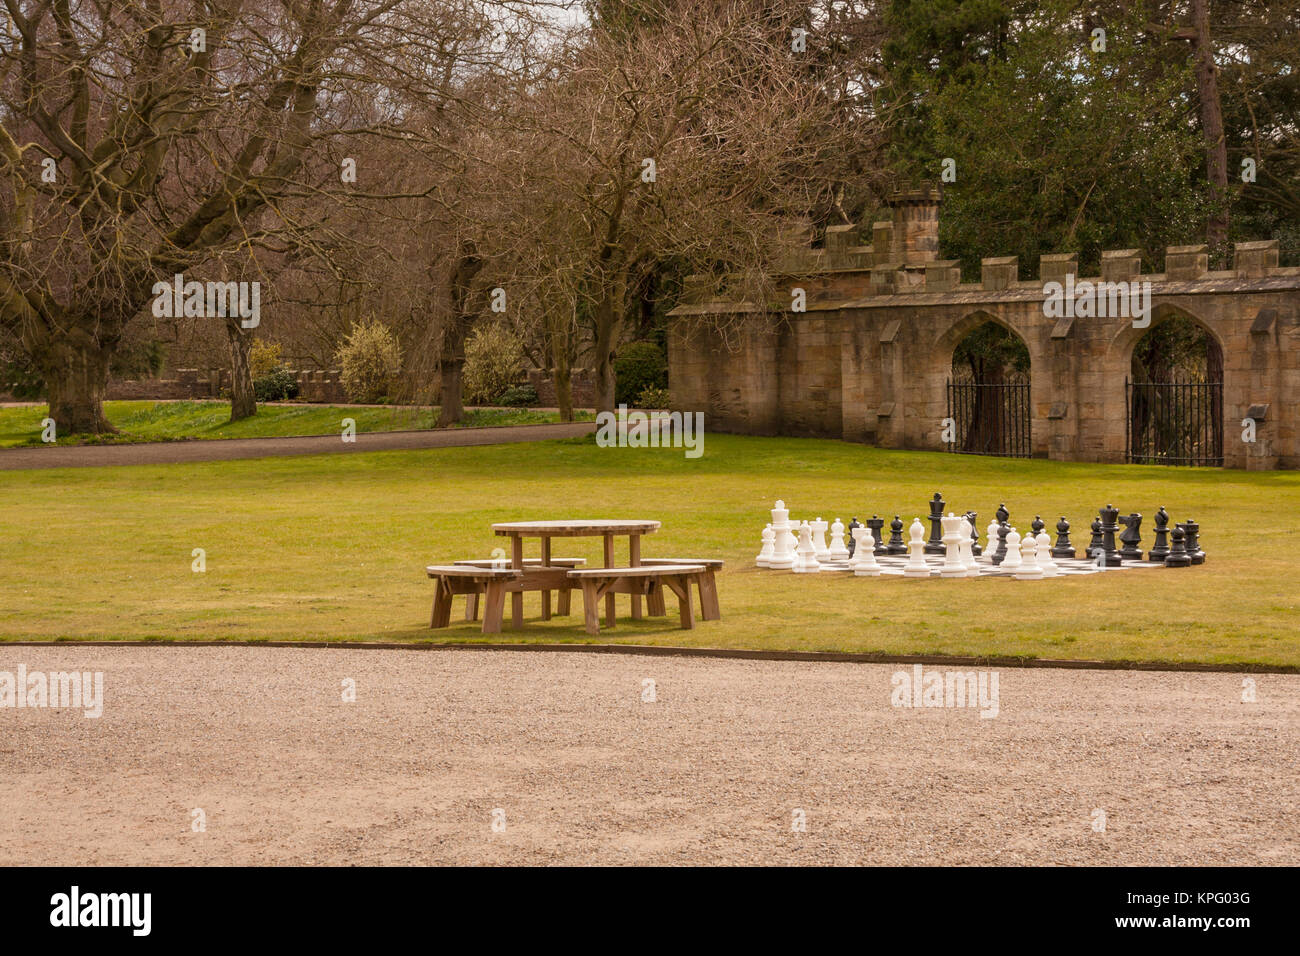 The lawn chess set and benches in the gardens of Auckland Castle,England,UK Stock Photo